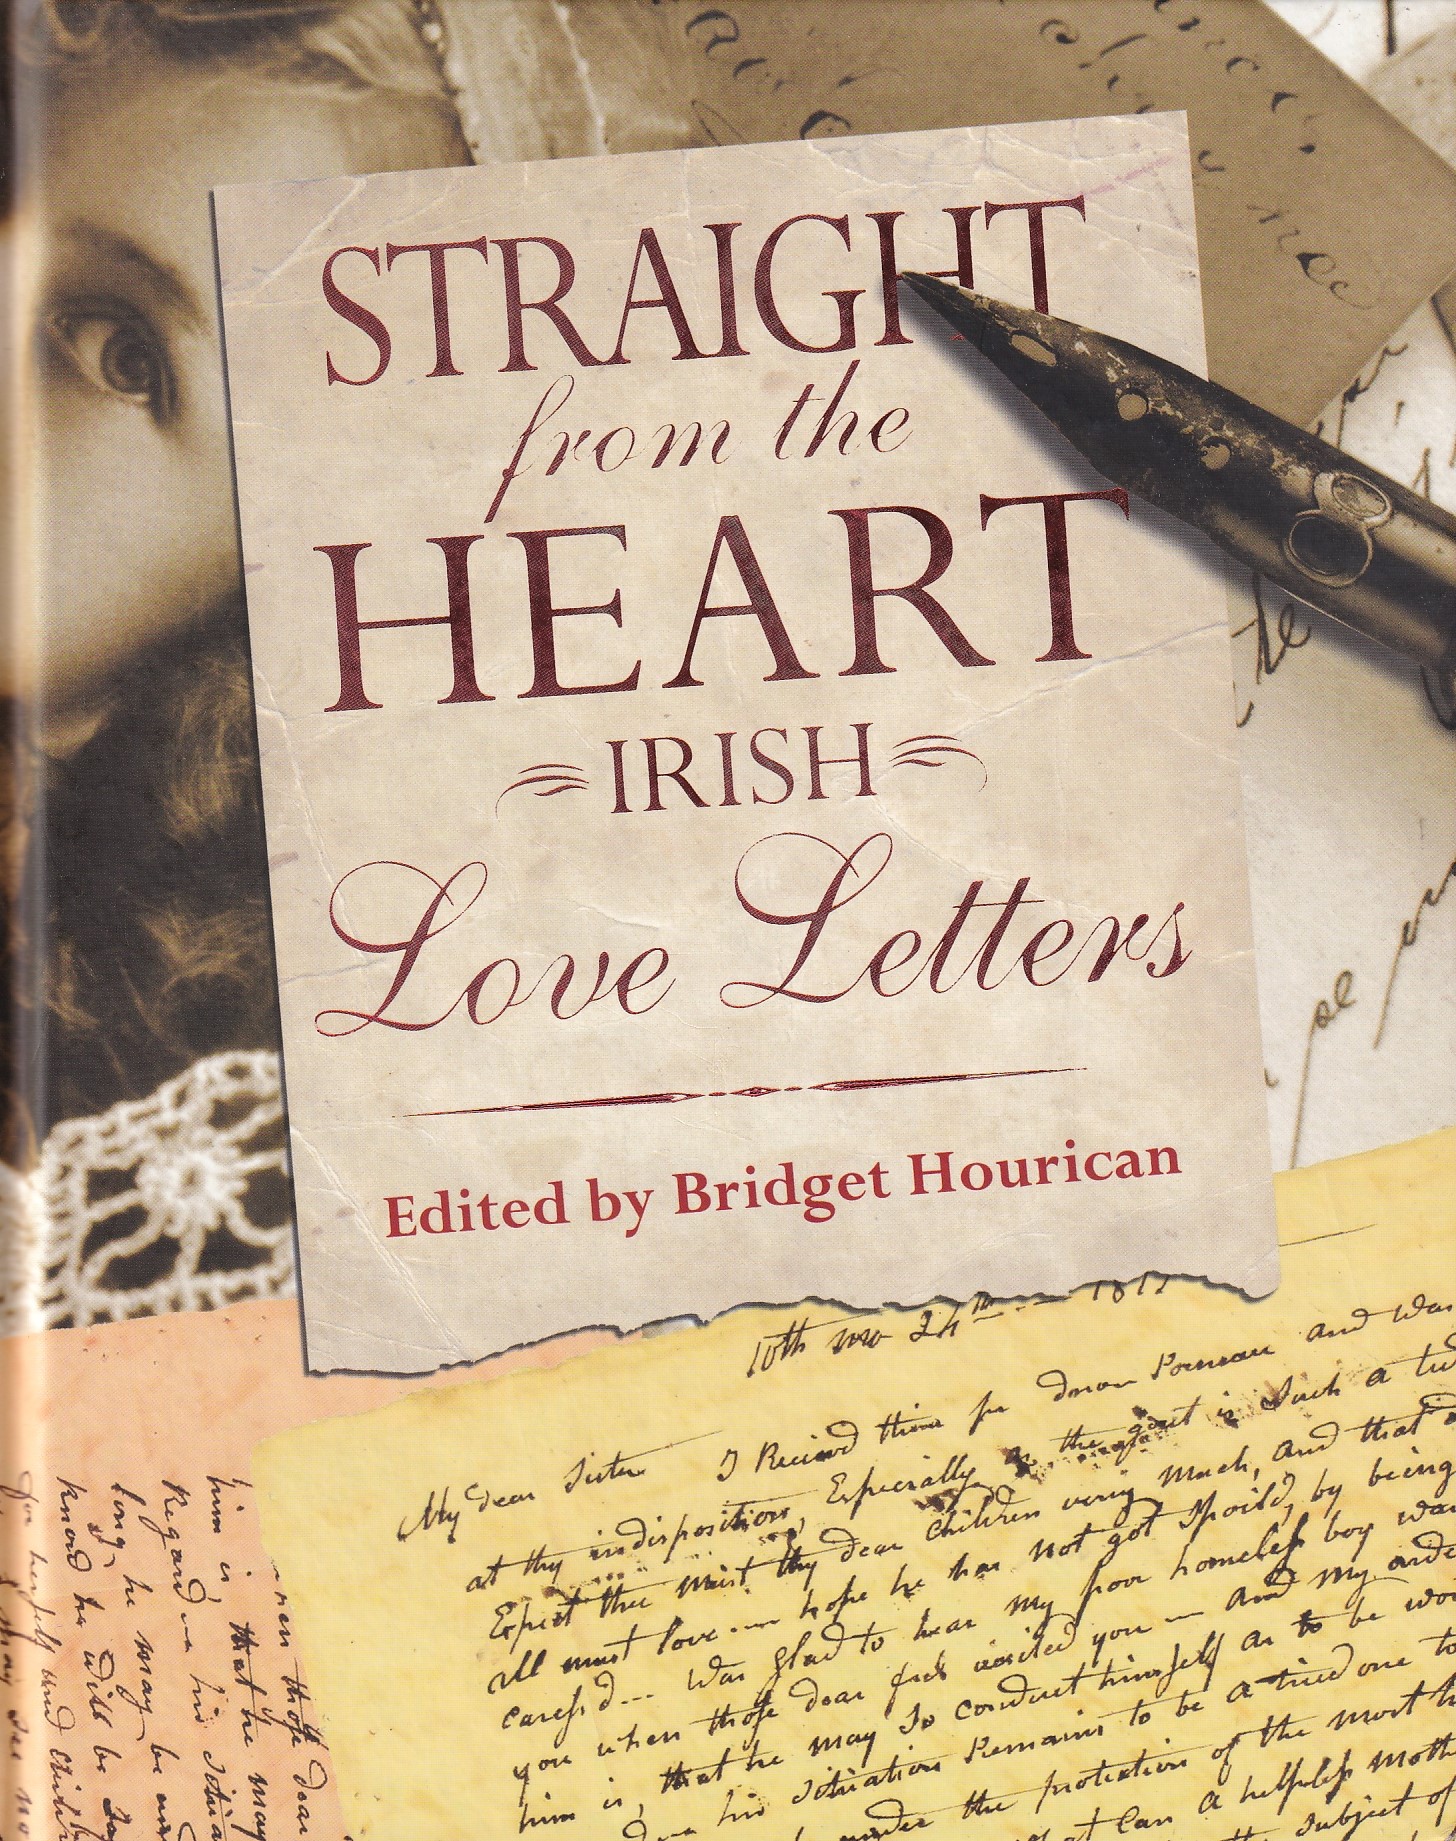 Straight from the Heart: Irish Love Letters by Bridget Hourican